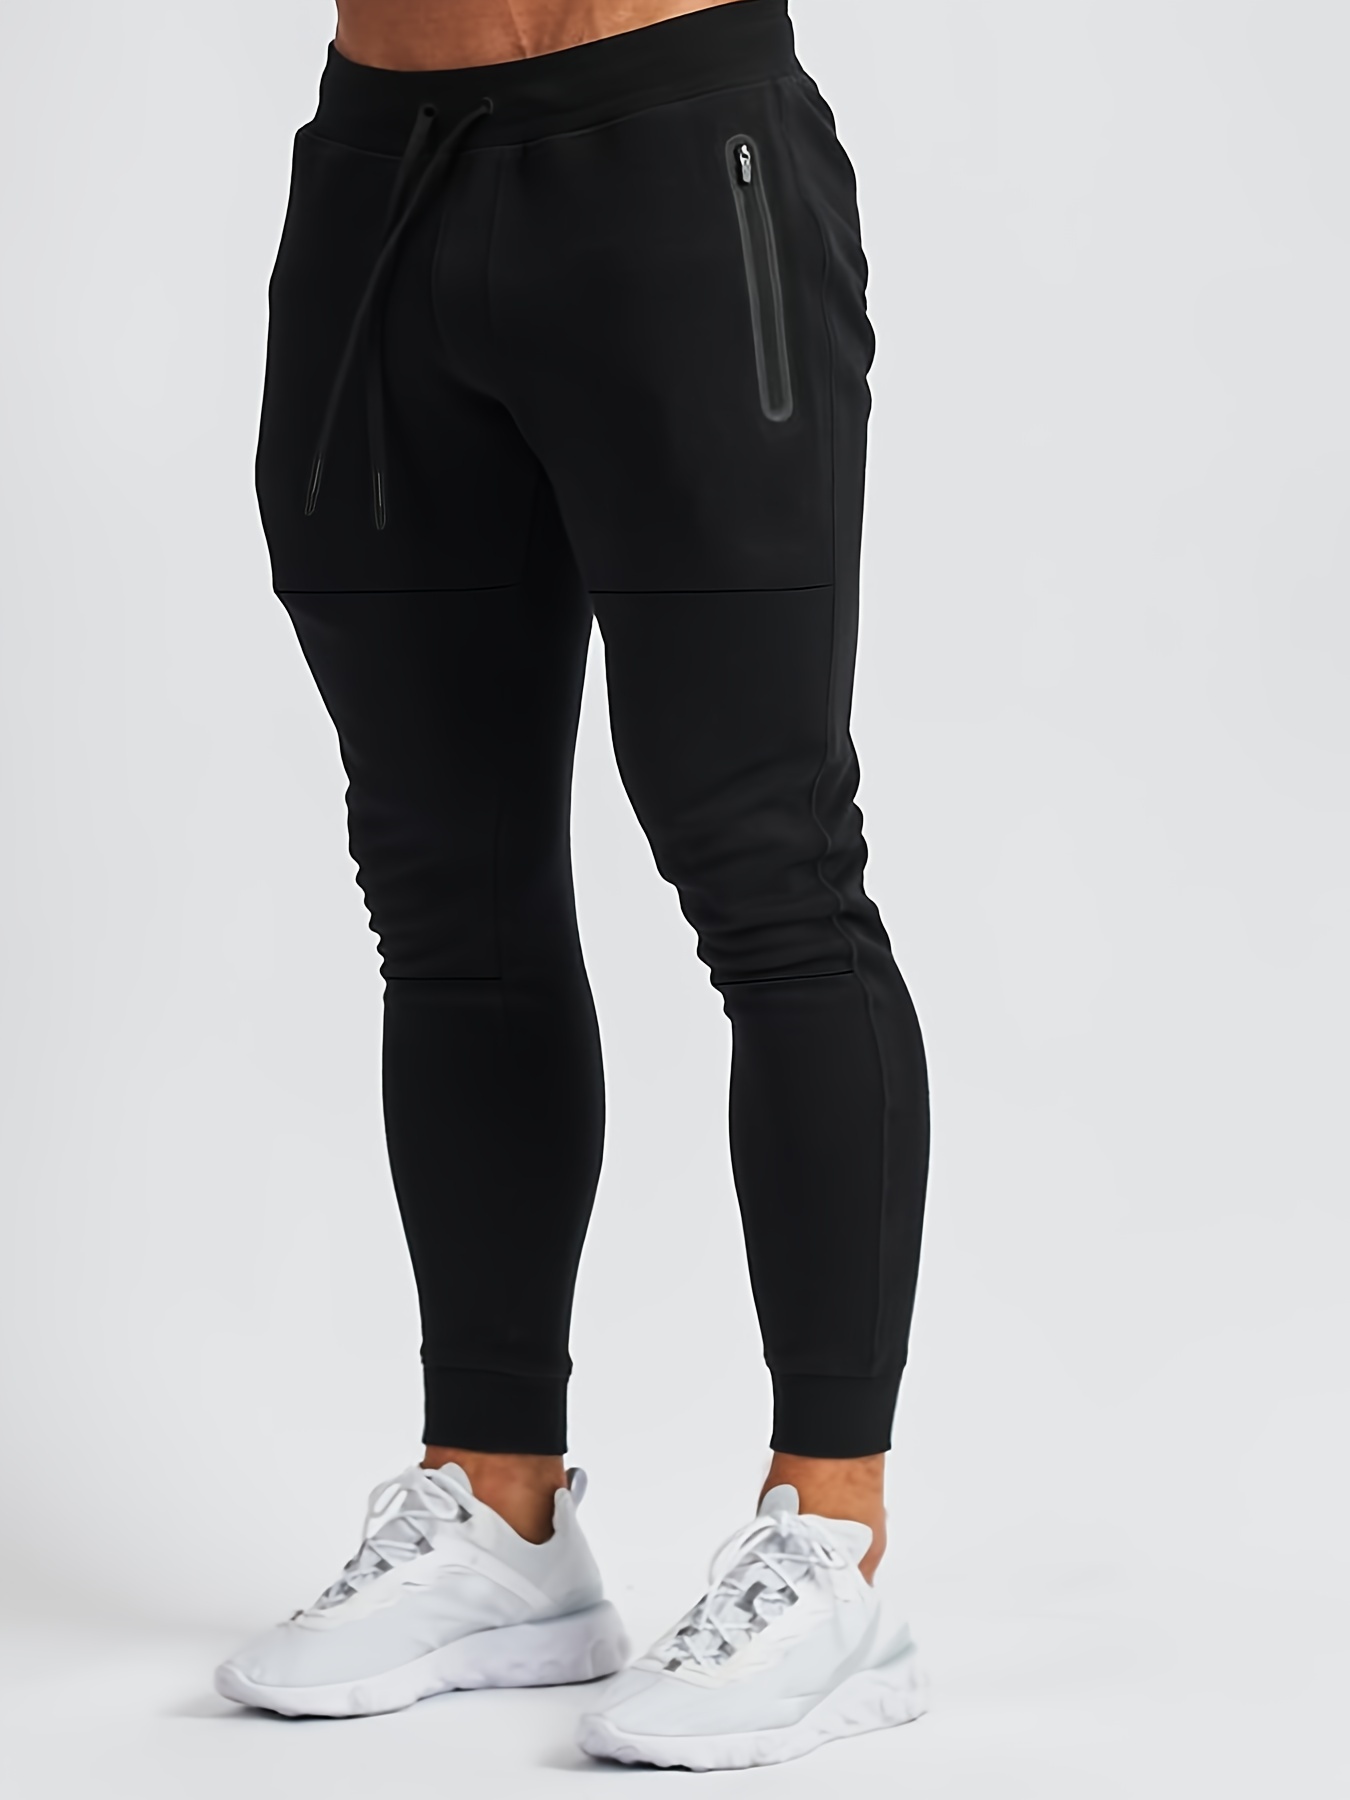 Men's Casual Fitness Athletic Joggers